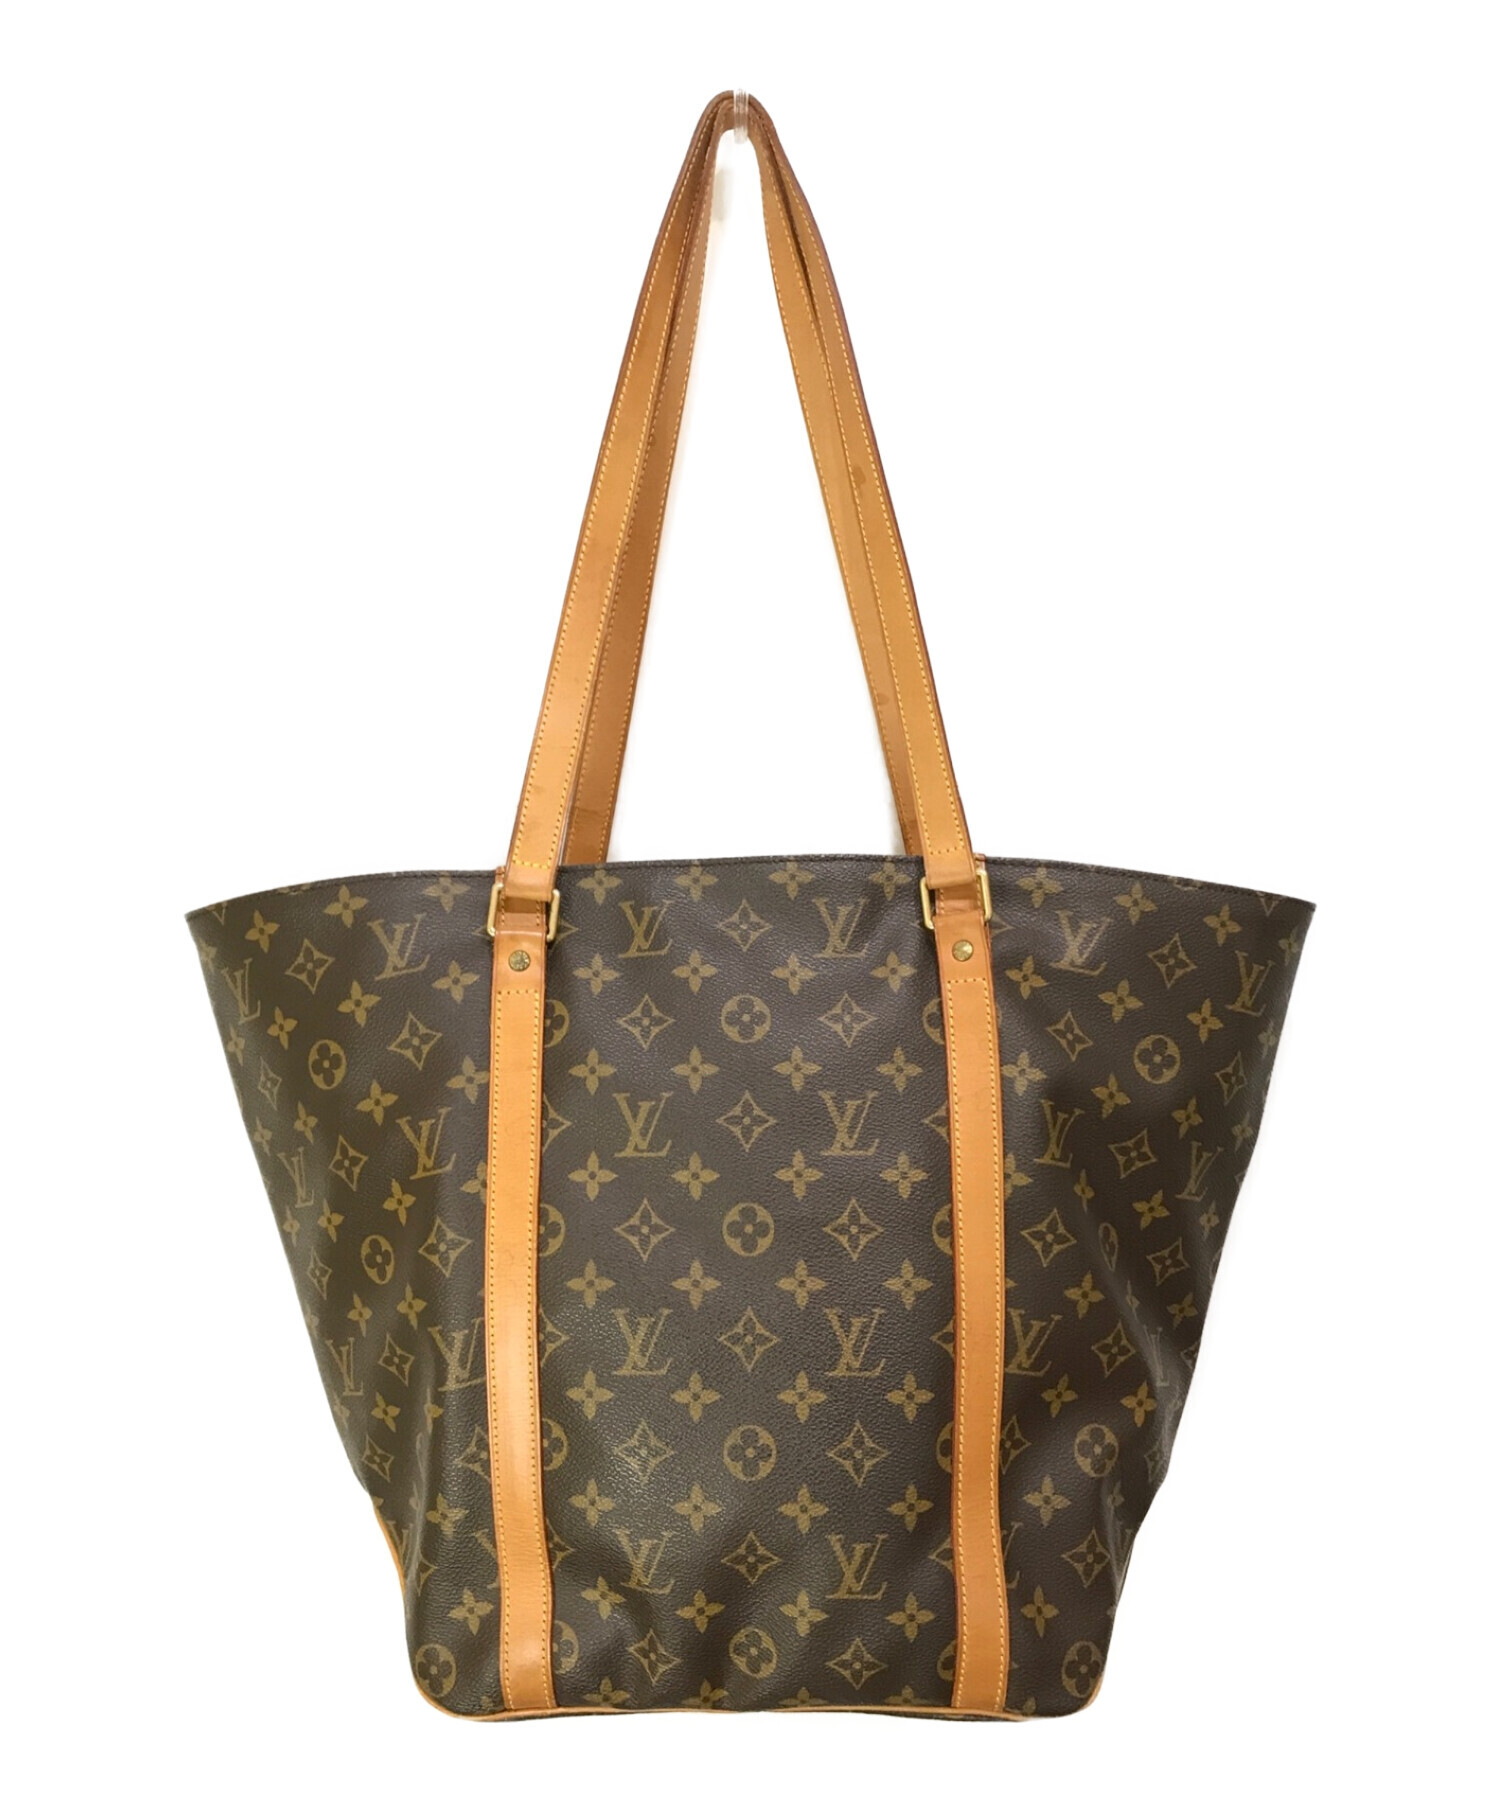 Louis Vuitton ルイヴィトン バックトートバッグ M52262 エピ